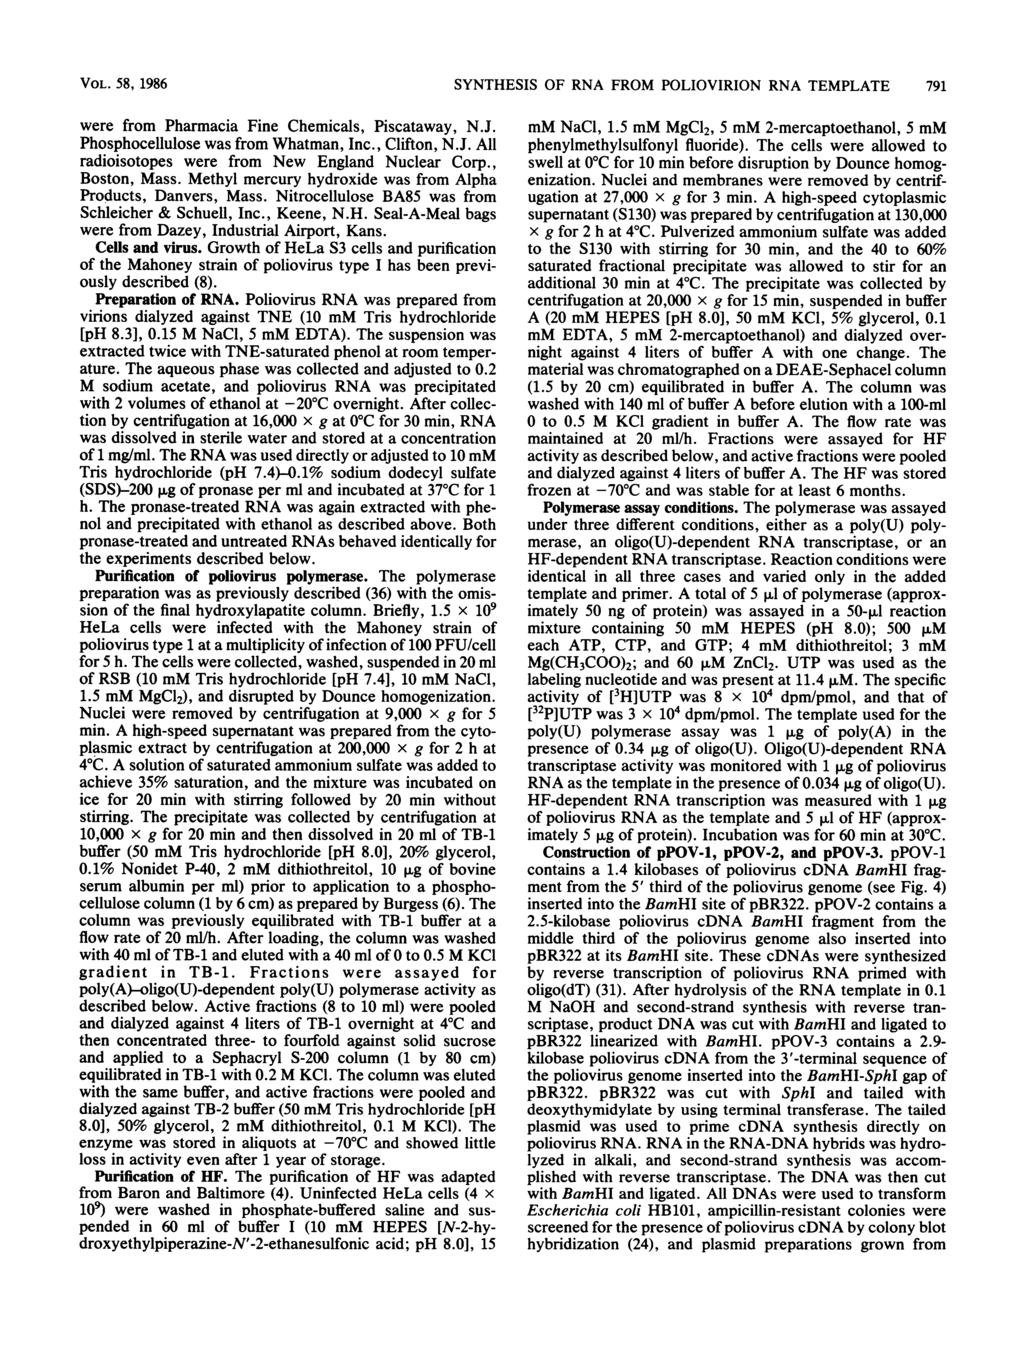 VOL. 58, 1986 SYNTHESIS OF RNA FROM POLIOVIRION RNA TEMPLATE 791 were from Pharmacia Fine Chemicals, Piscataway, N.J. Phosphocellulose was from Whatman, Inc., Clifton, N.J. All radioisotopes were from New England Nuclear Corp.